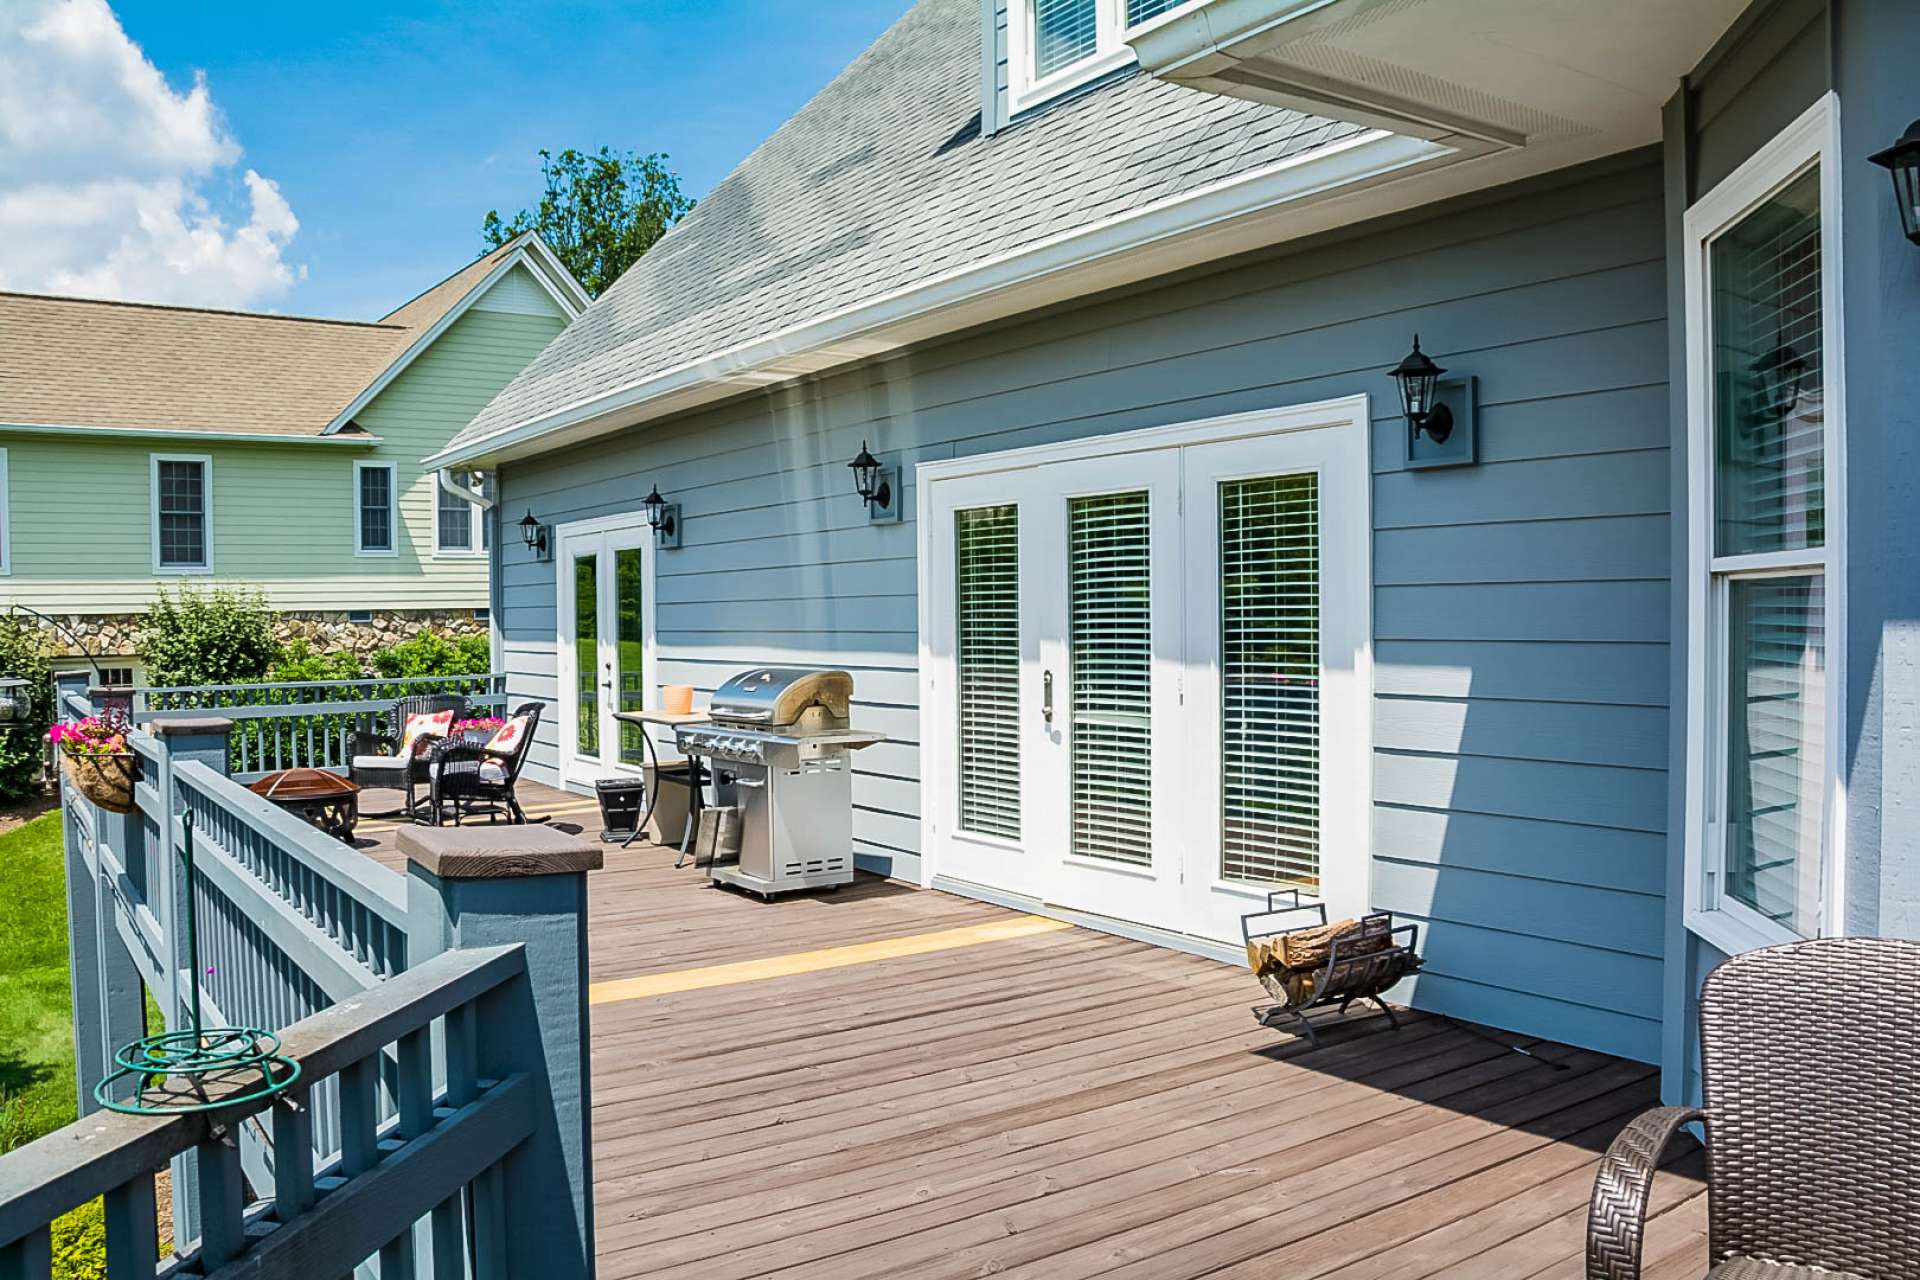 Relax with a tall glass of iced tea on the spacious open back deck that is perfect for outdoor entertaining.